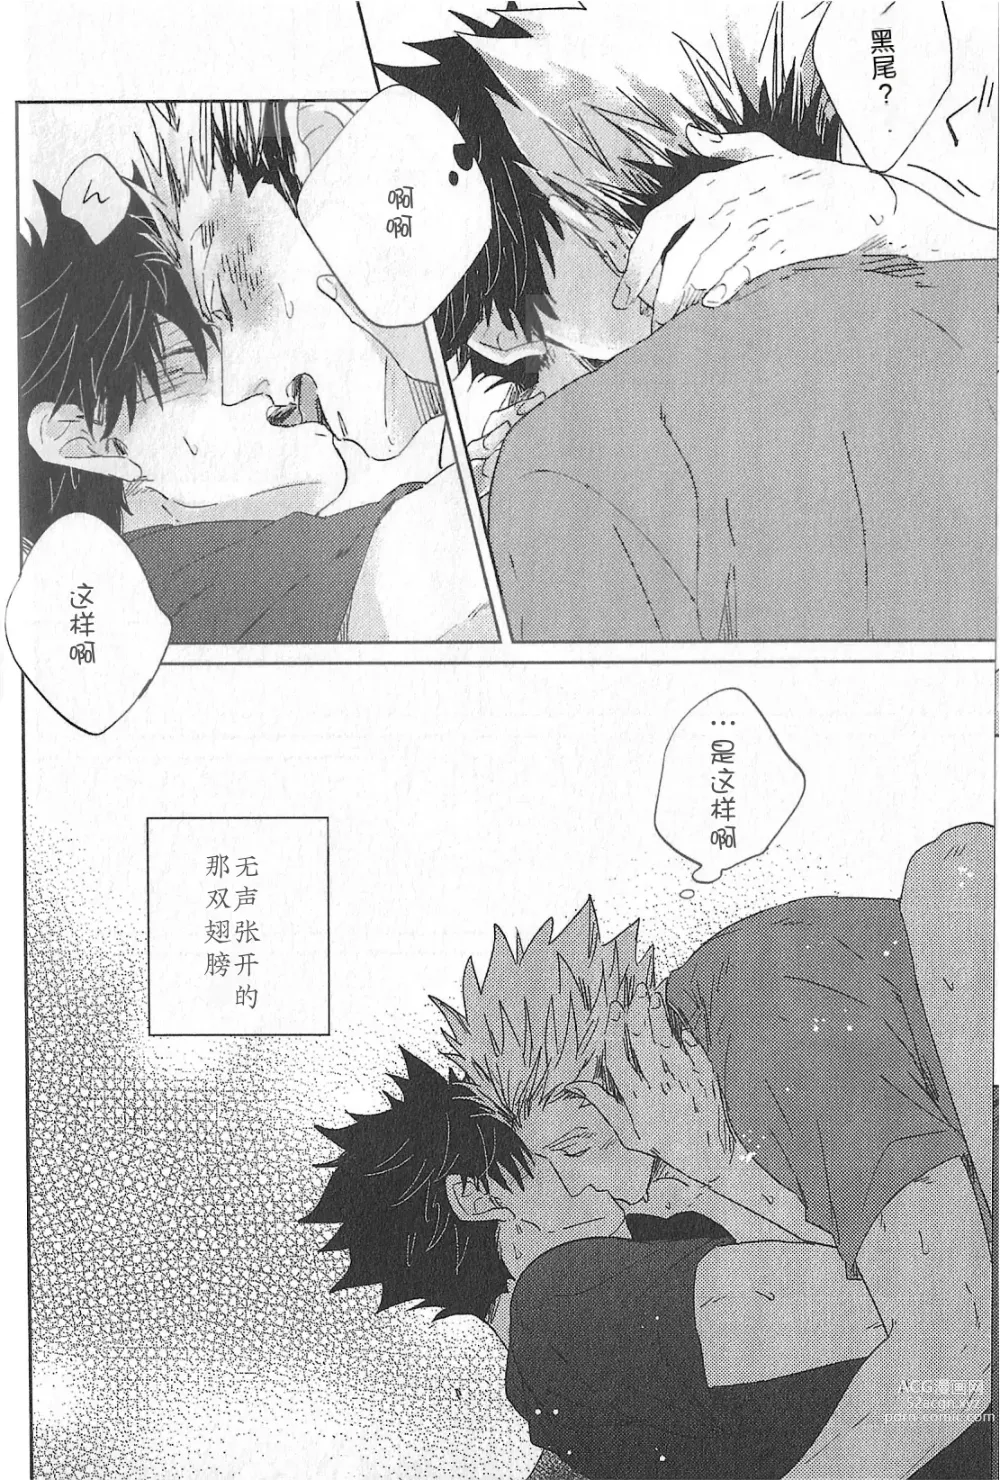 Page 5 of doujinshi 极境的野兽 前篇